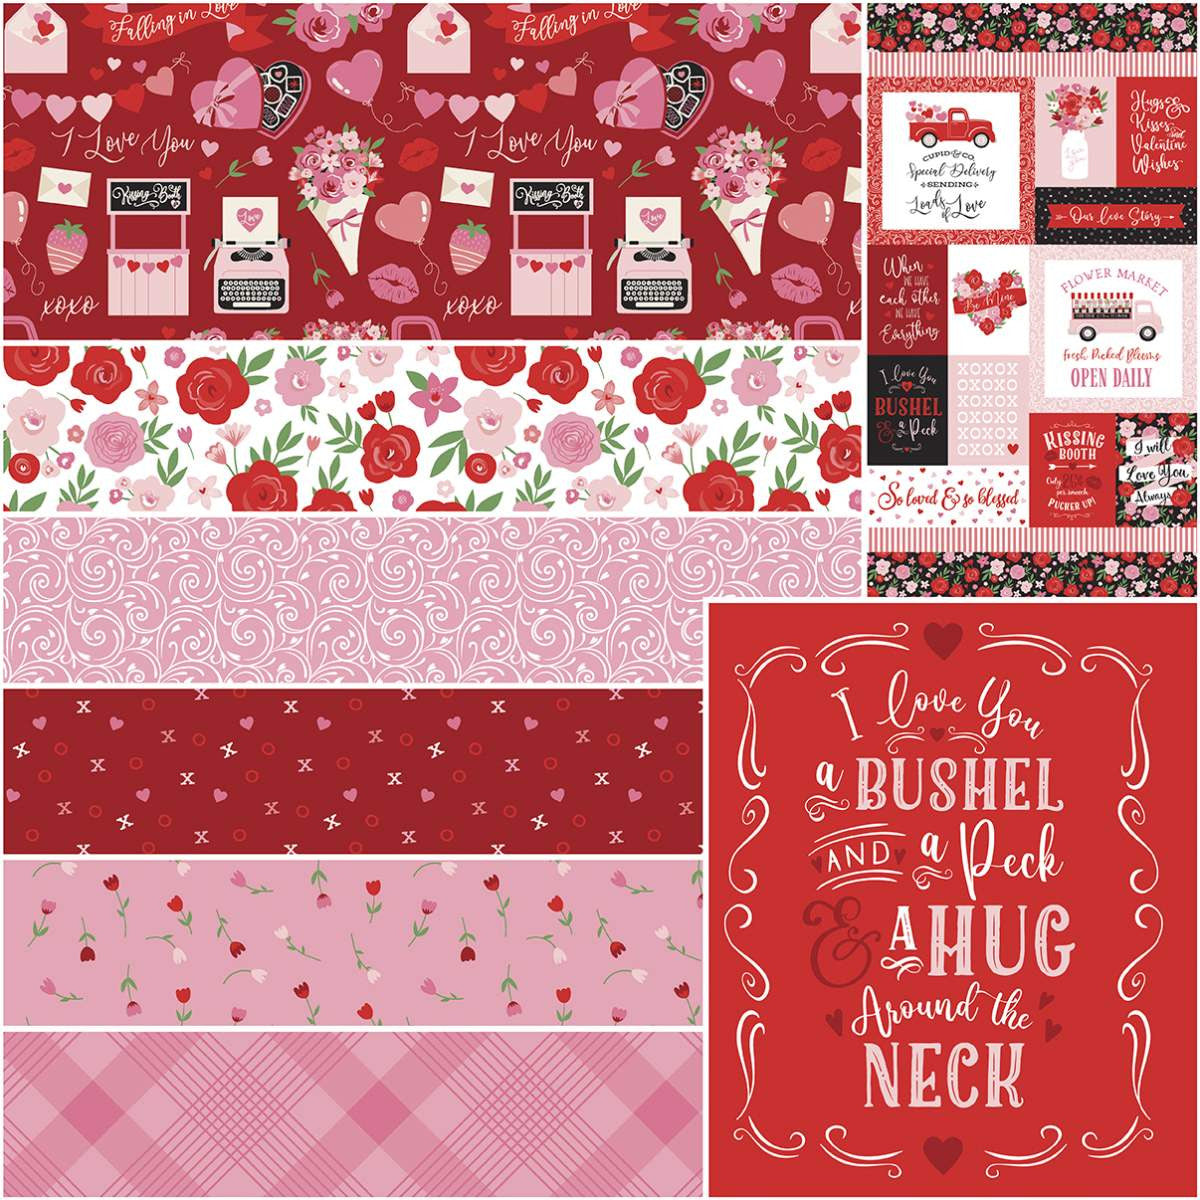 Falling in Love by Dani Mogstad 1-Yard Bundle Red includes 6 yards and 2 panels  1YD-11280R-8 Bundle